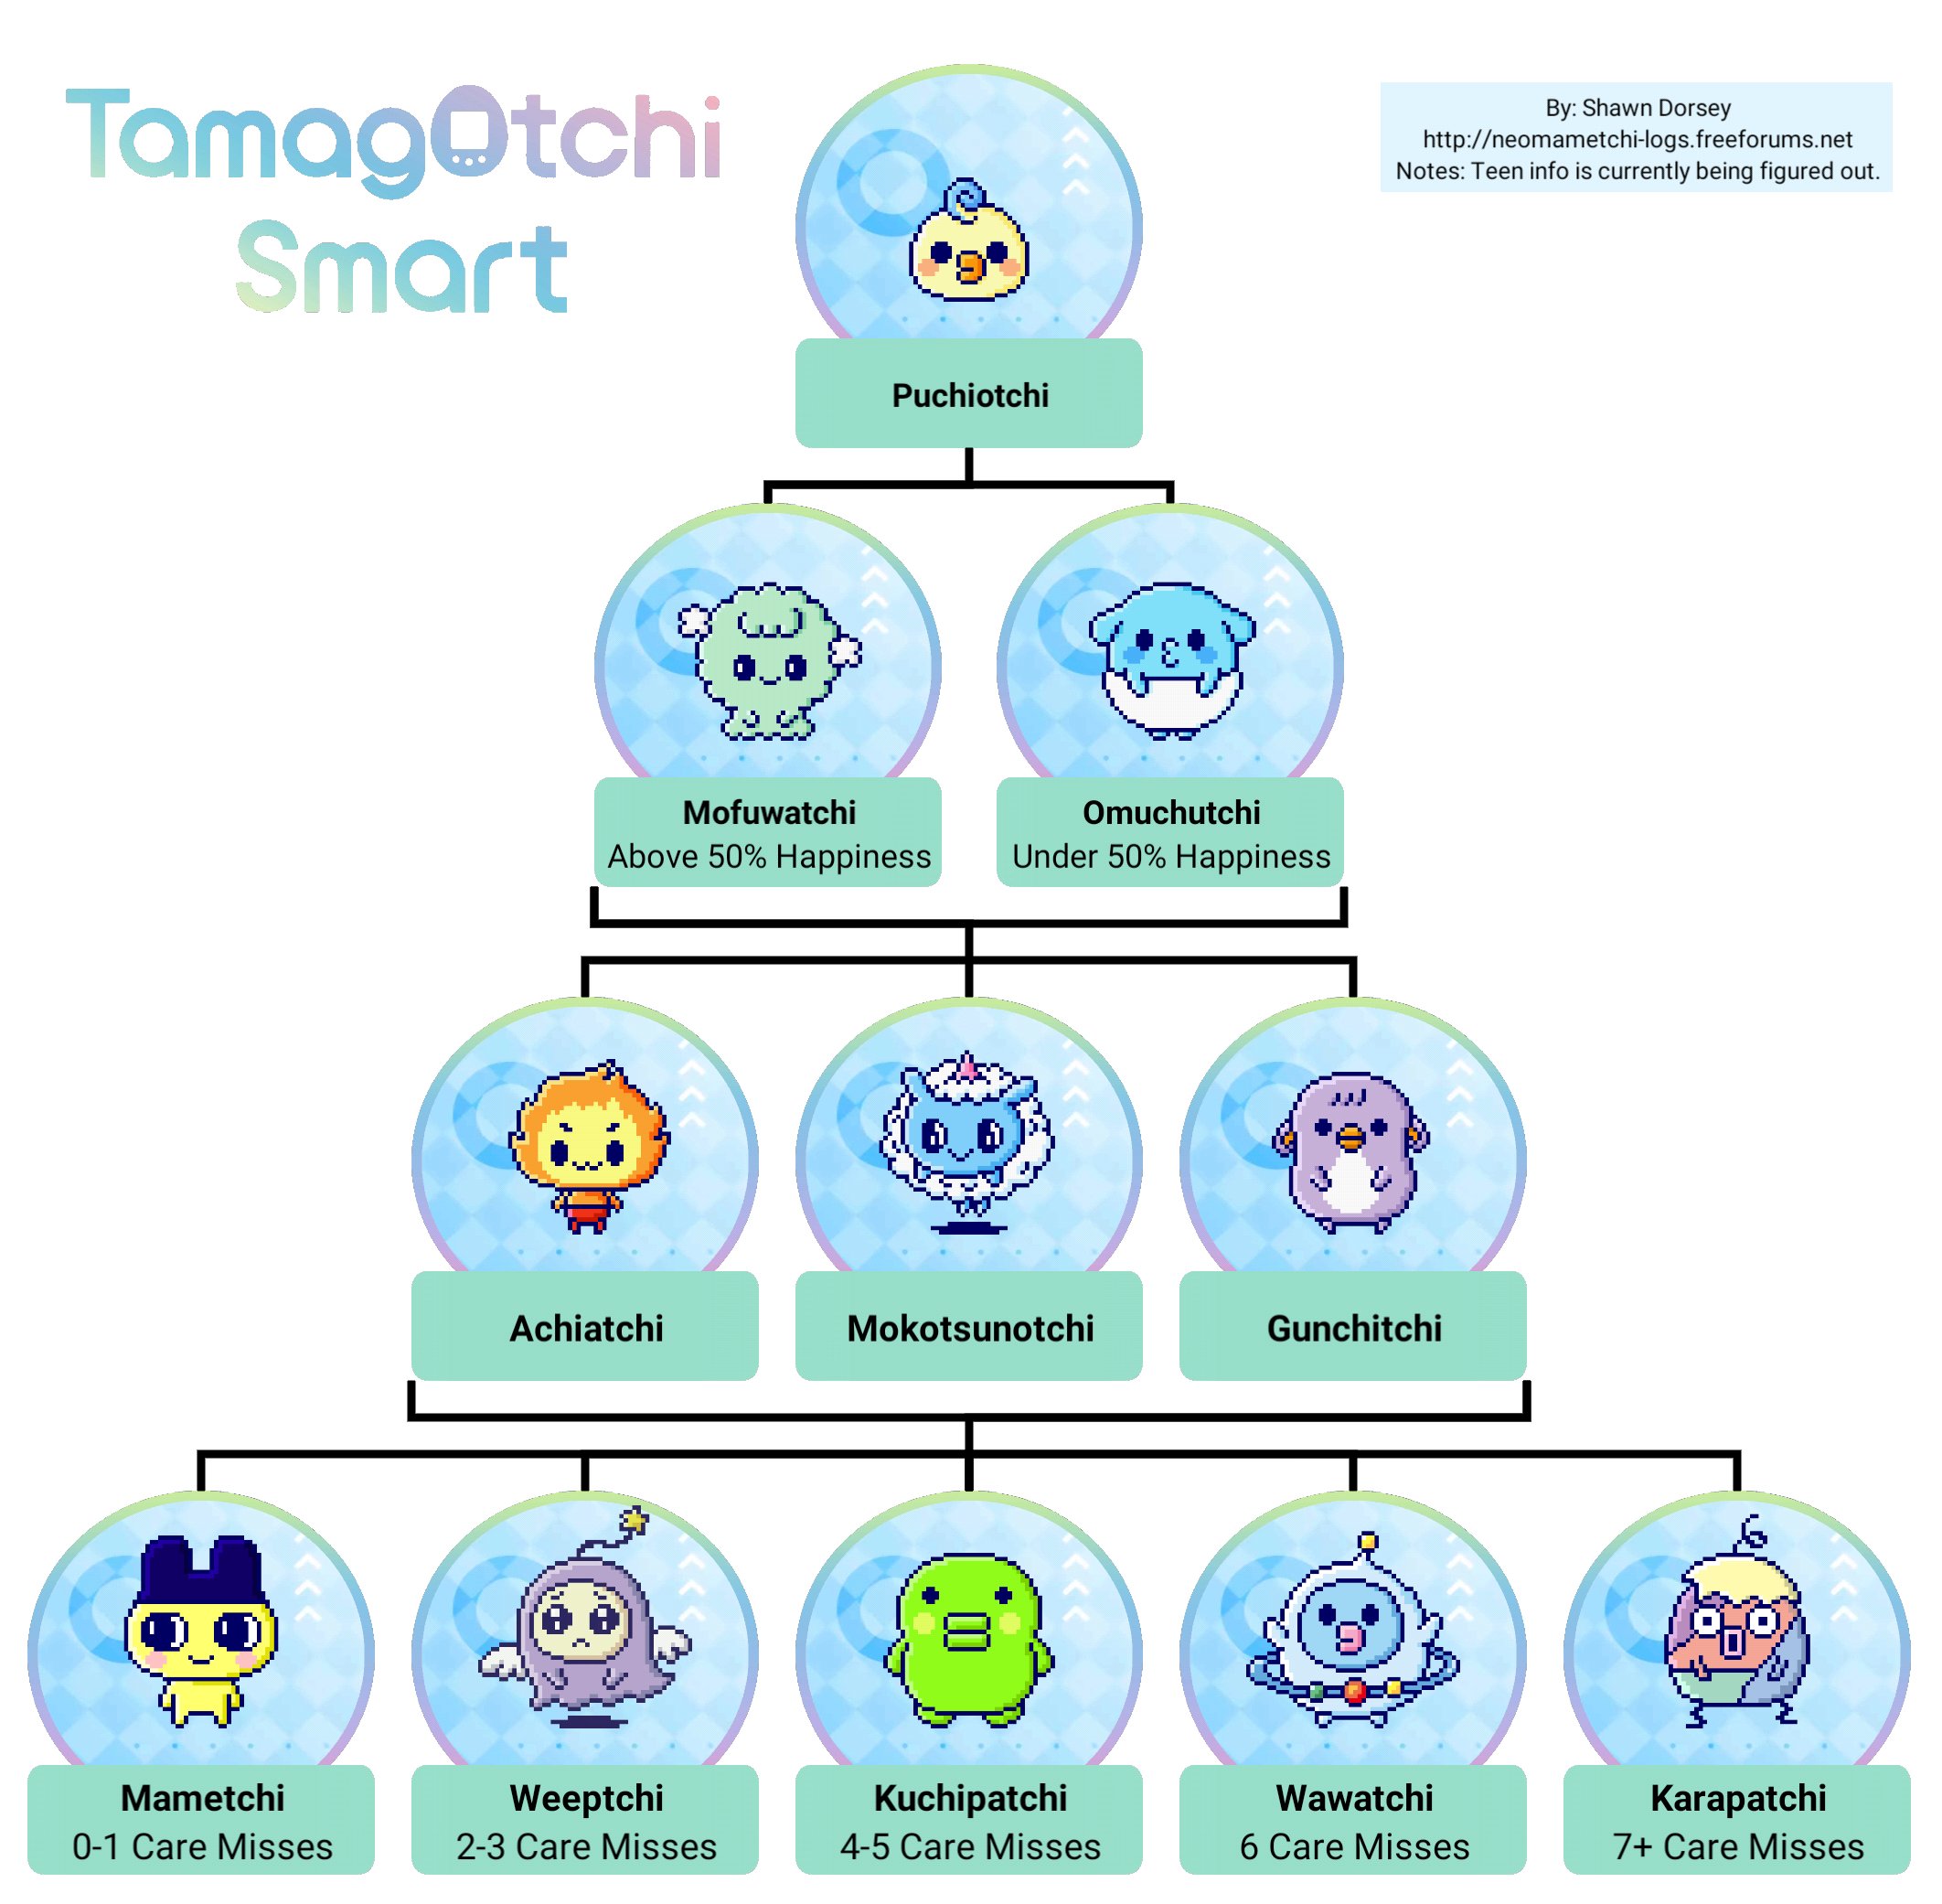 Fantastisk let farvning NeoMametchi Logs on Twitter: "Growth charts for the Tamagotchi Smart. Teen  info might take awhile to figure out so here's Ver 1.0 of the chart. # tamagotchi #tamagotchismart #たまごっち #たまごっちスマート https://t.co/2icXY0h0dw" /  Twitter